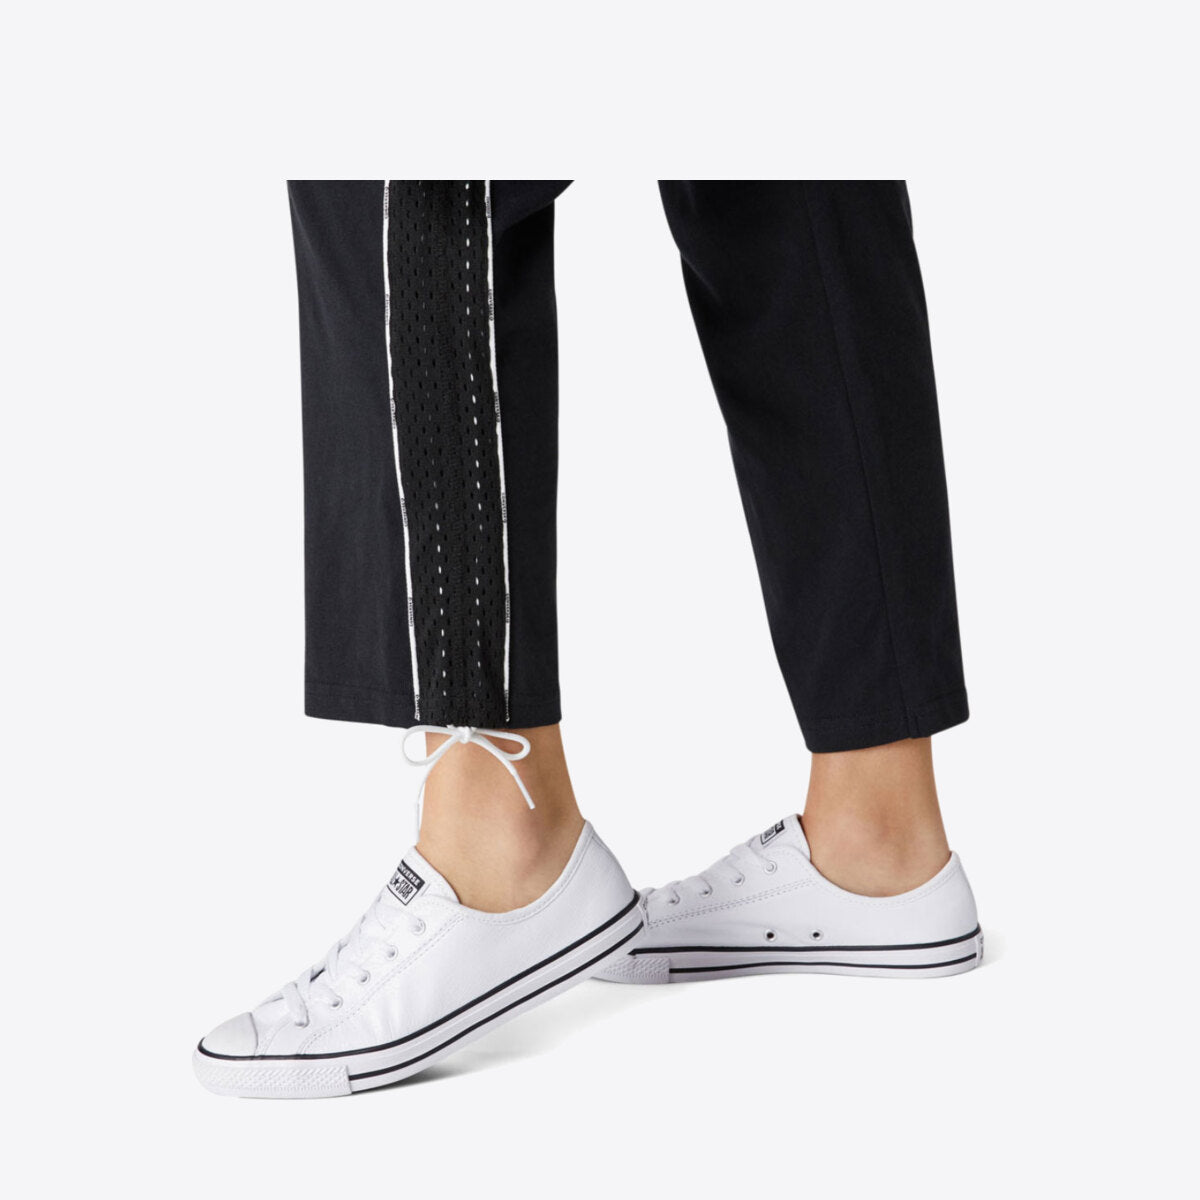 CONVERSE Dainty 2.0 Leather Low White - Image 0